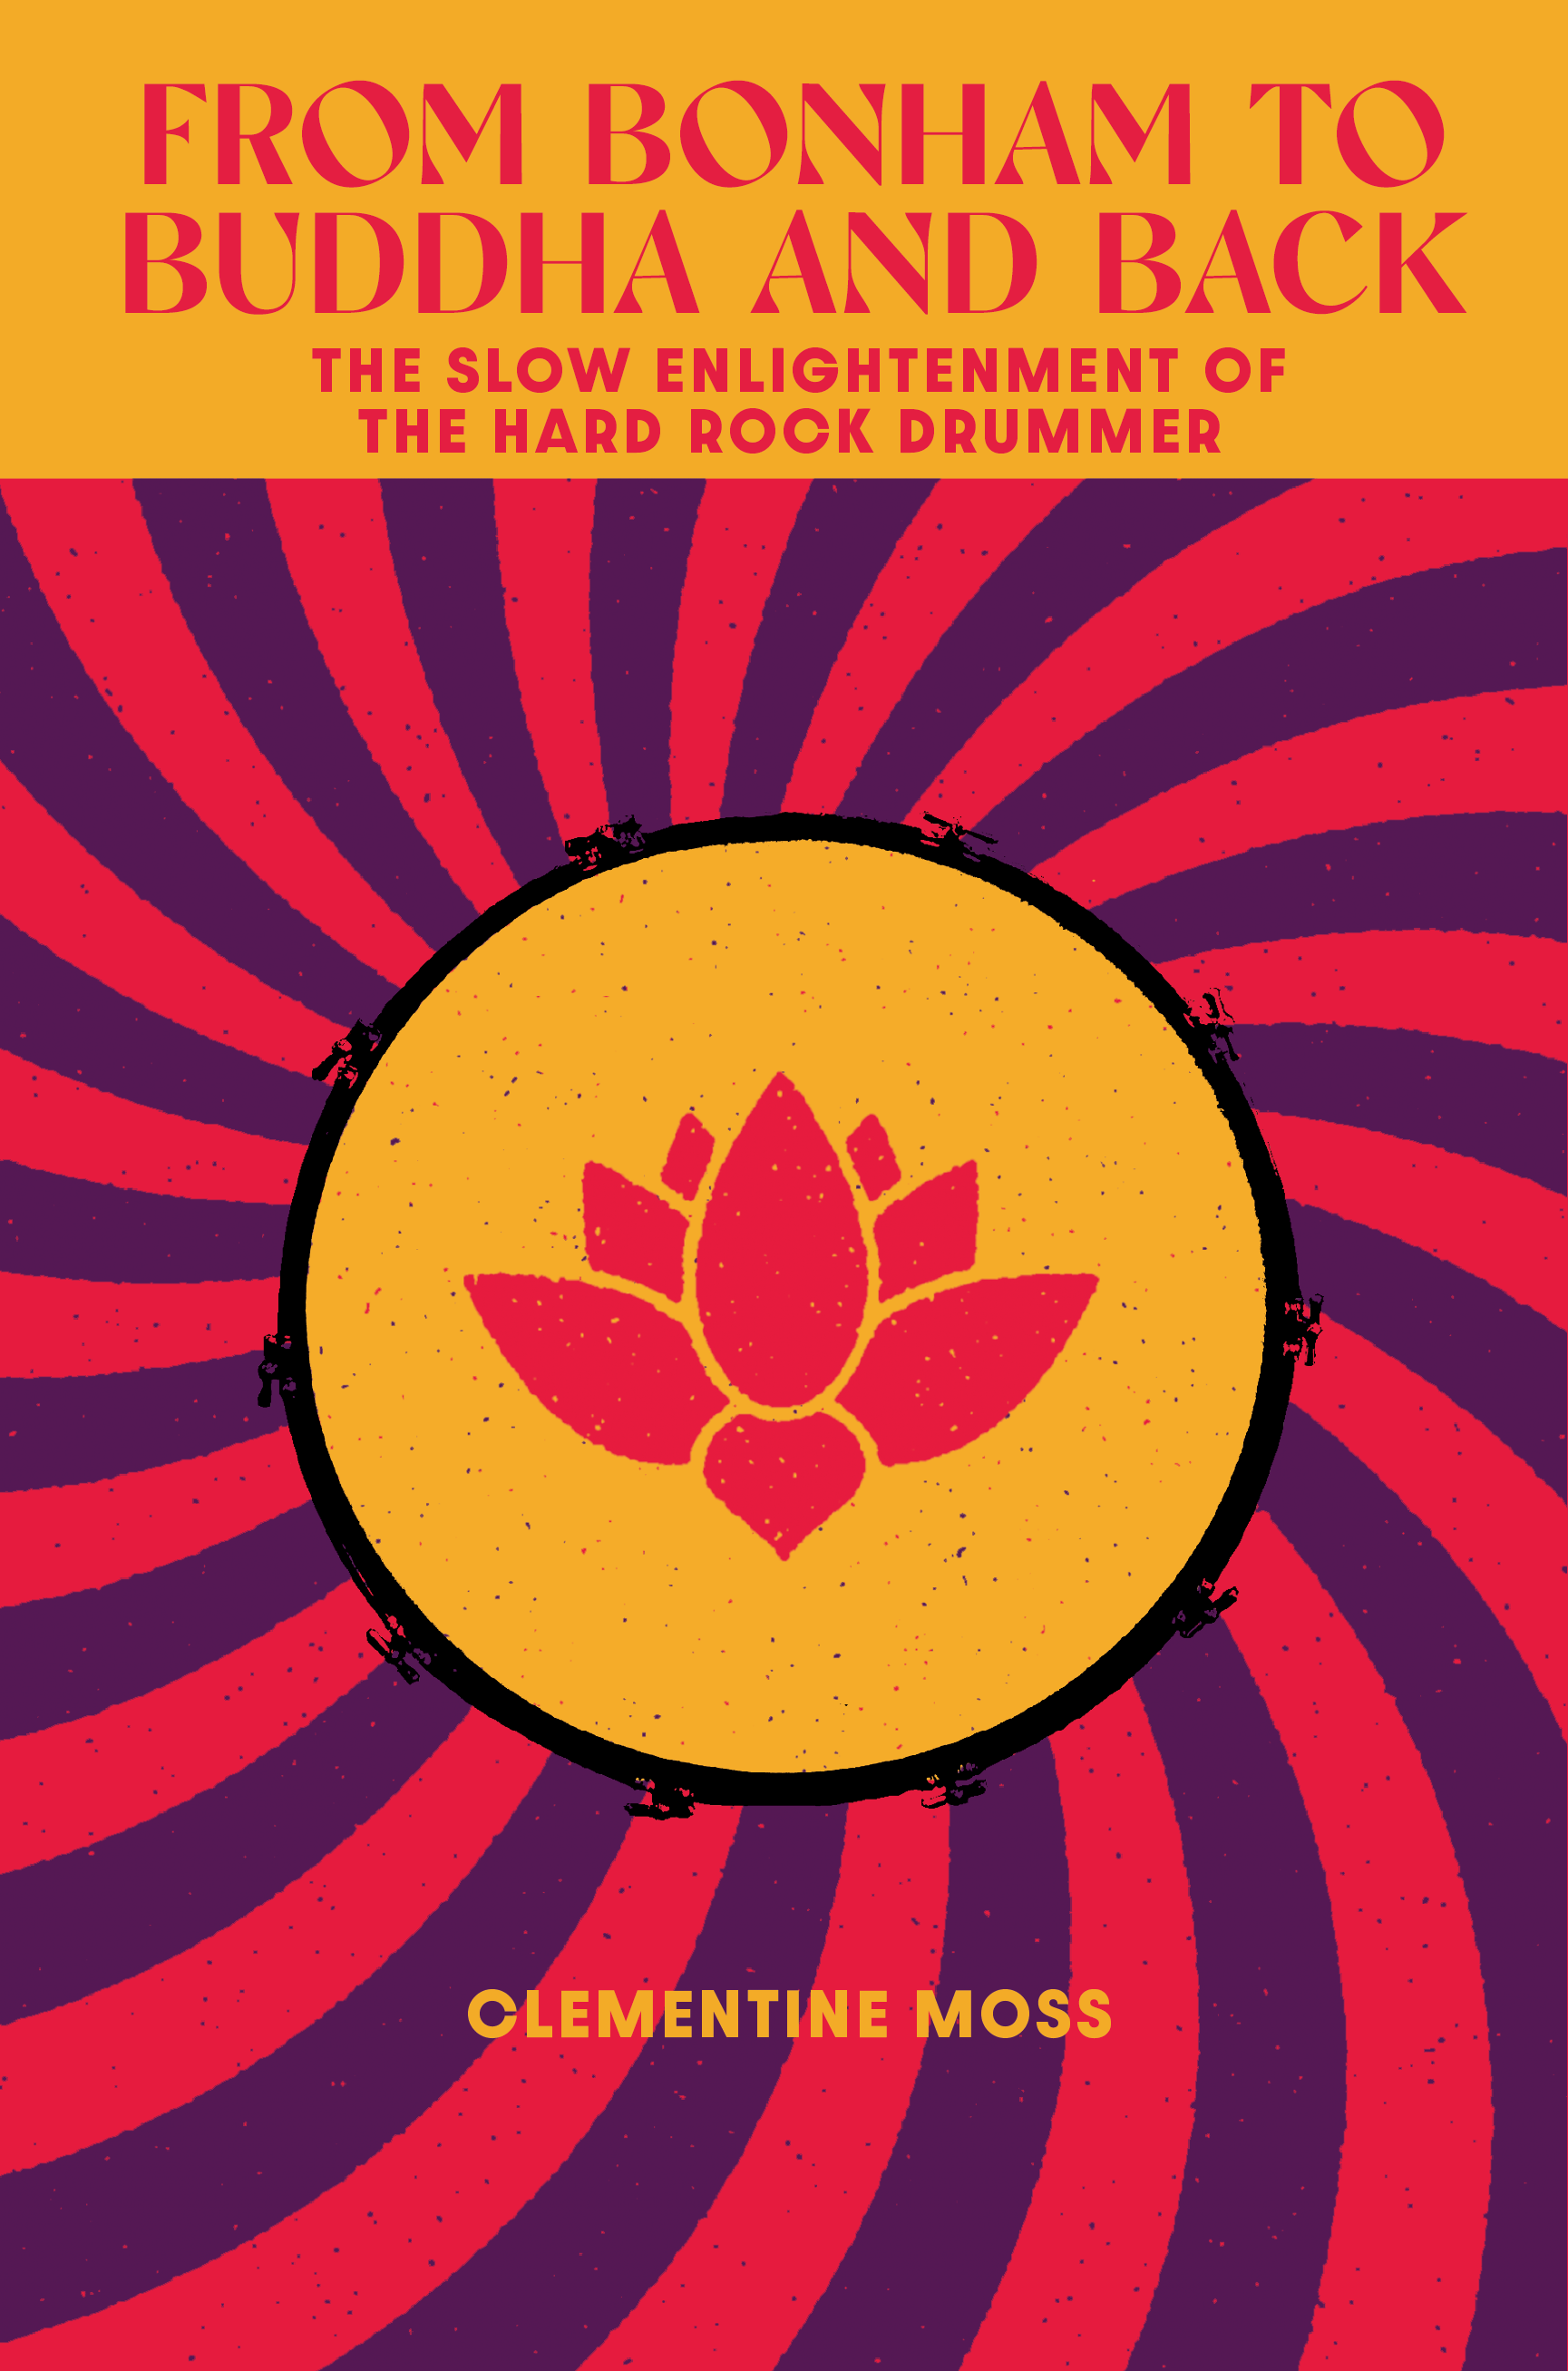 FROM BONHAM TO BUDDHA AND BACK book cover